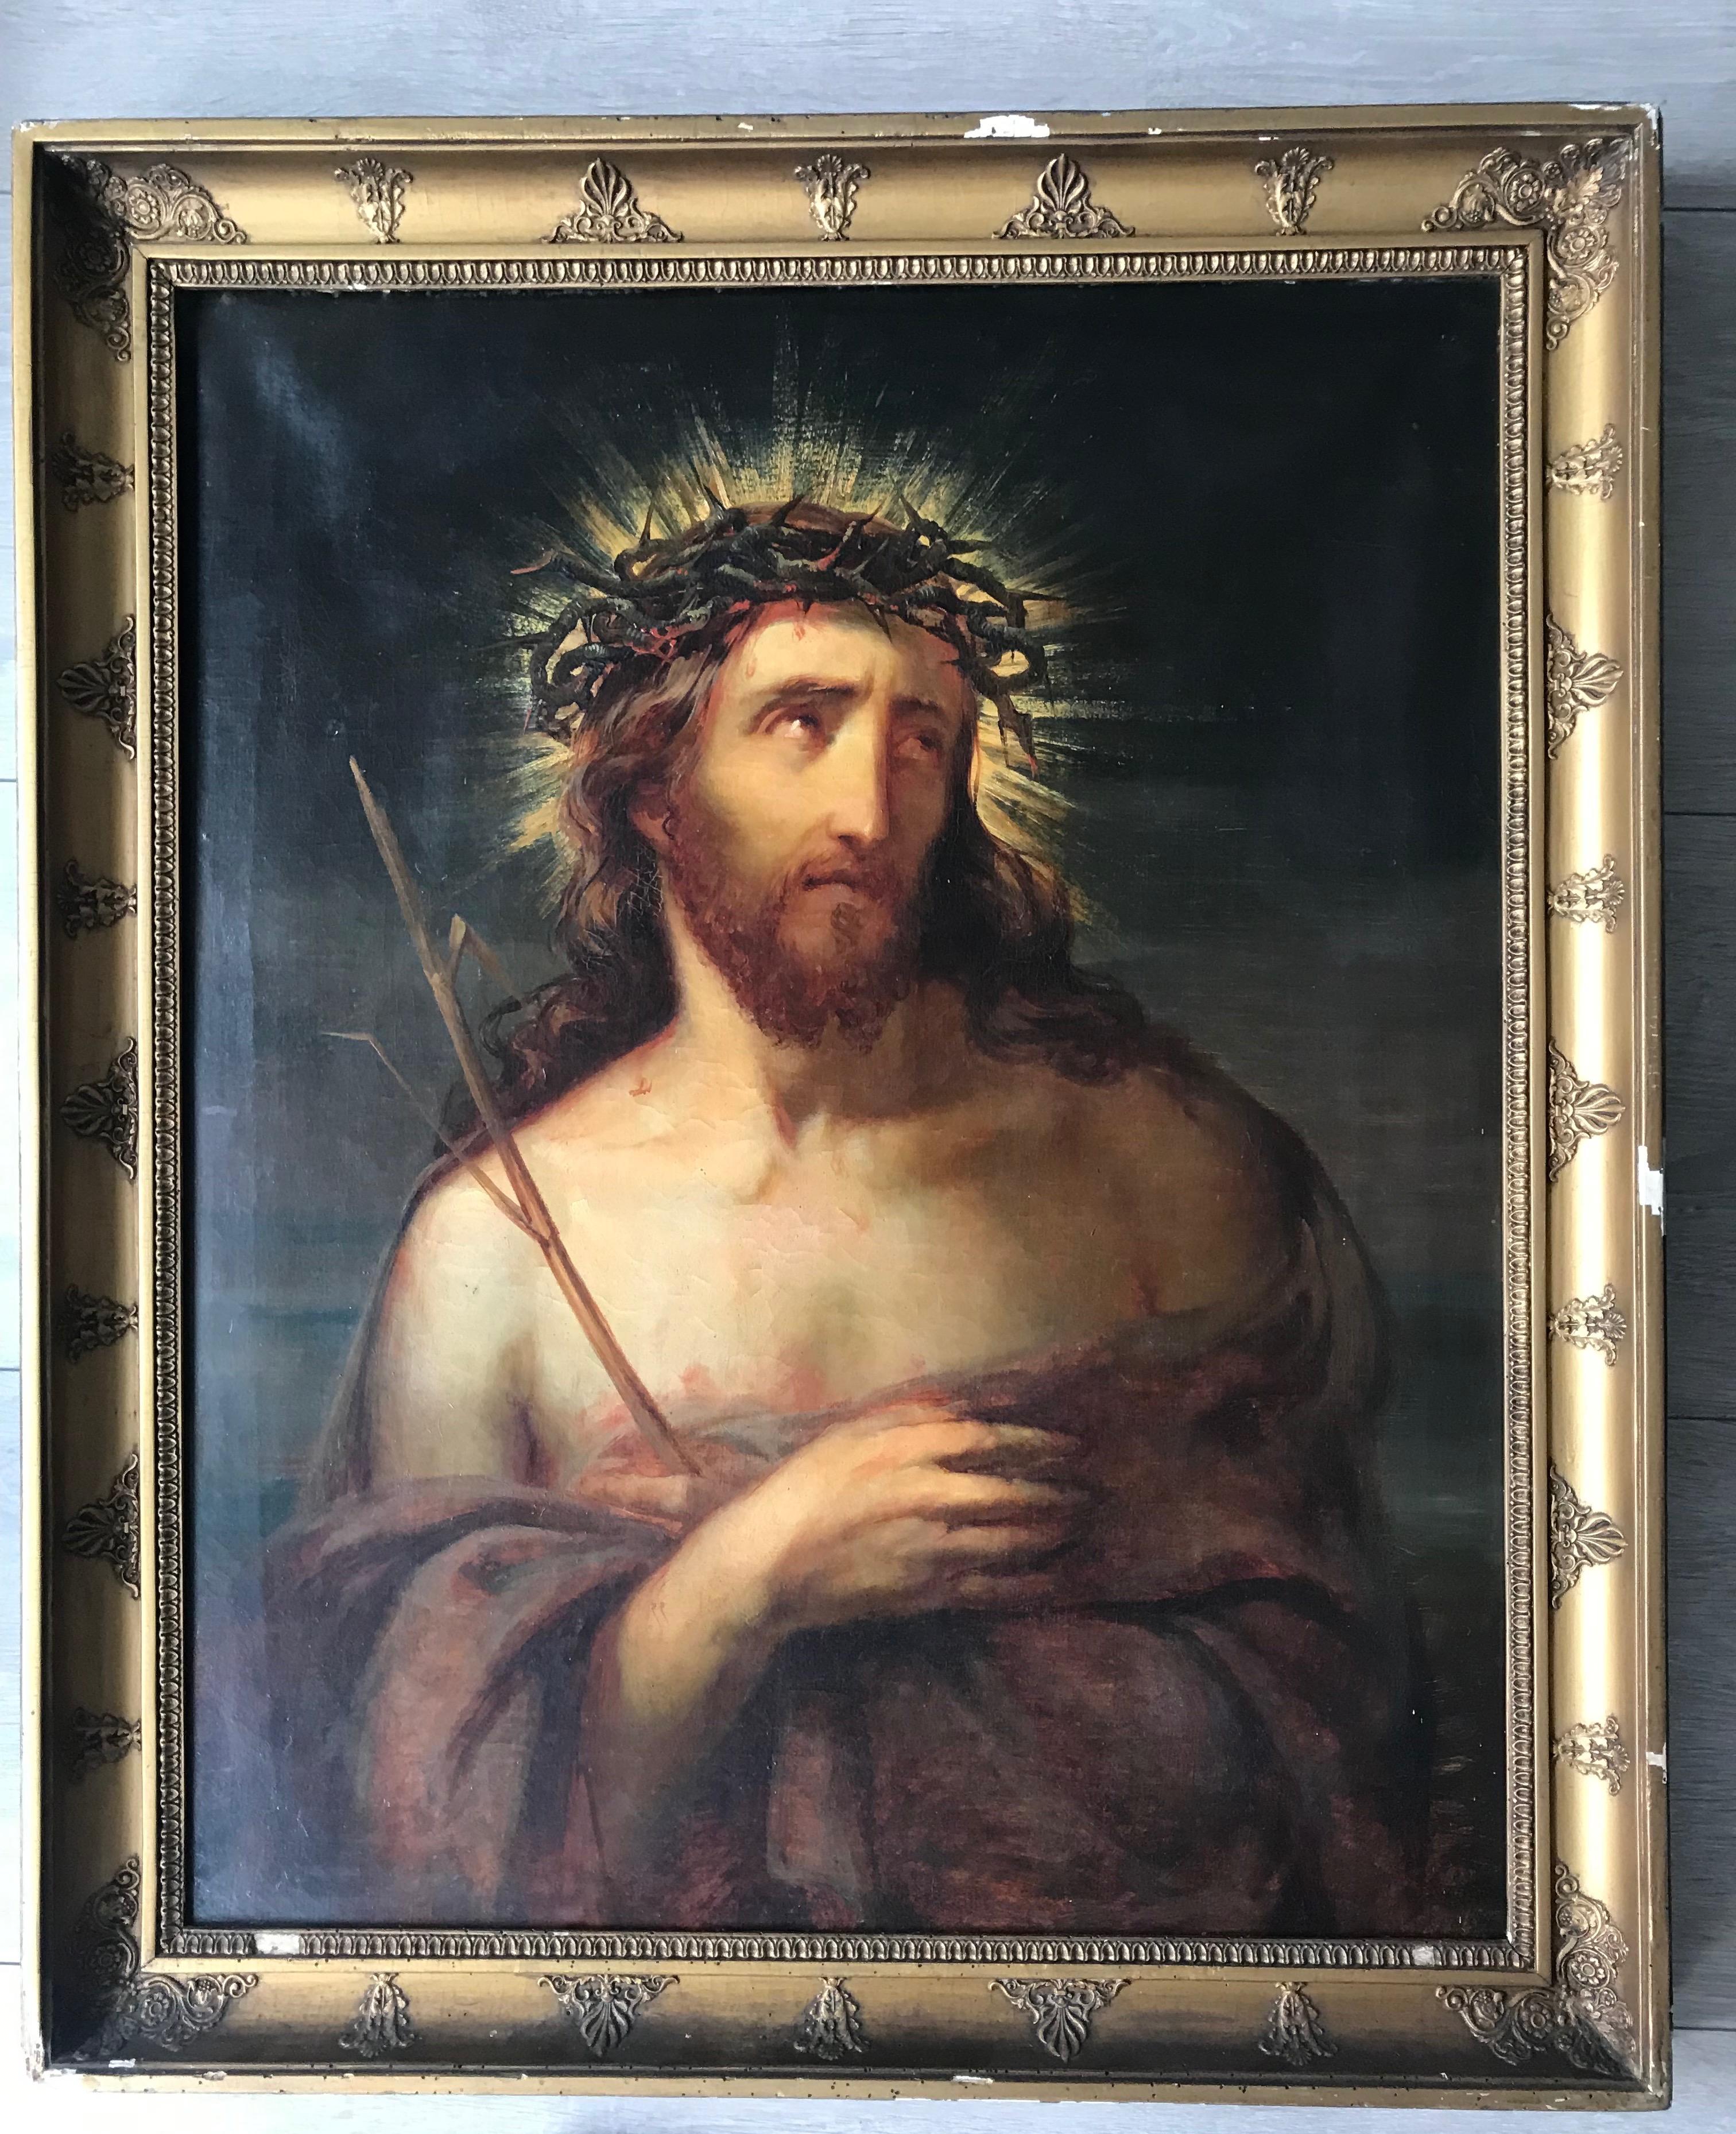 Large Antique Oil on Canvas Portrait Painting of Jesus Christ in Wooden Frame 1